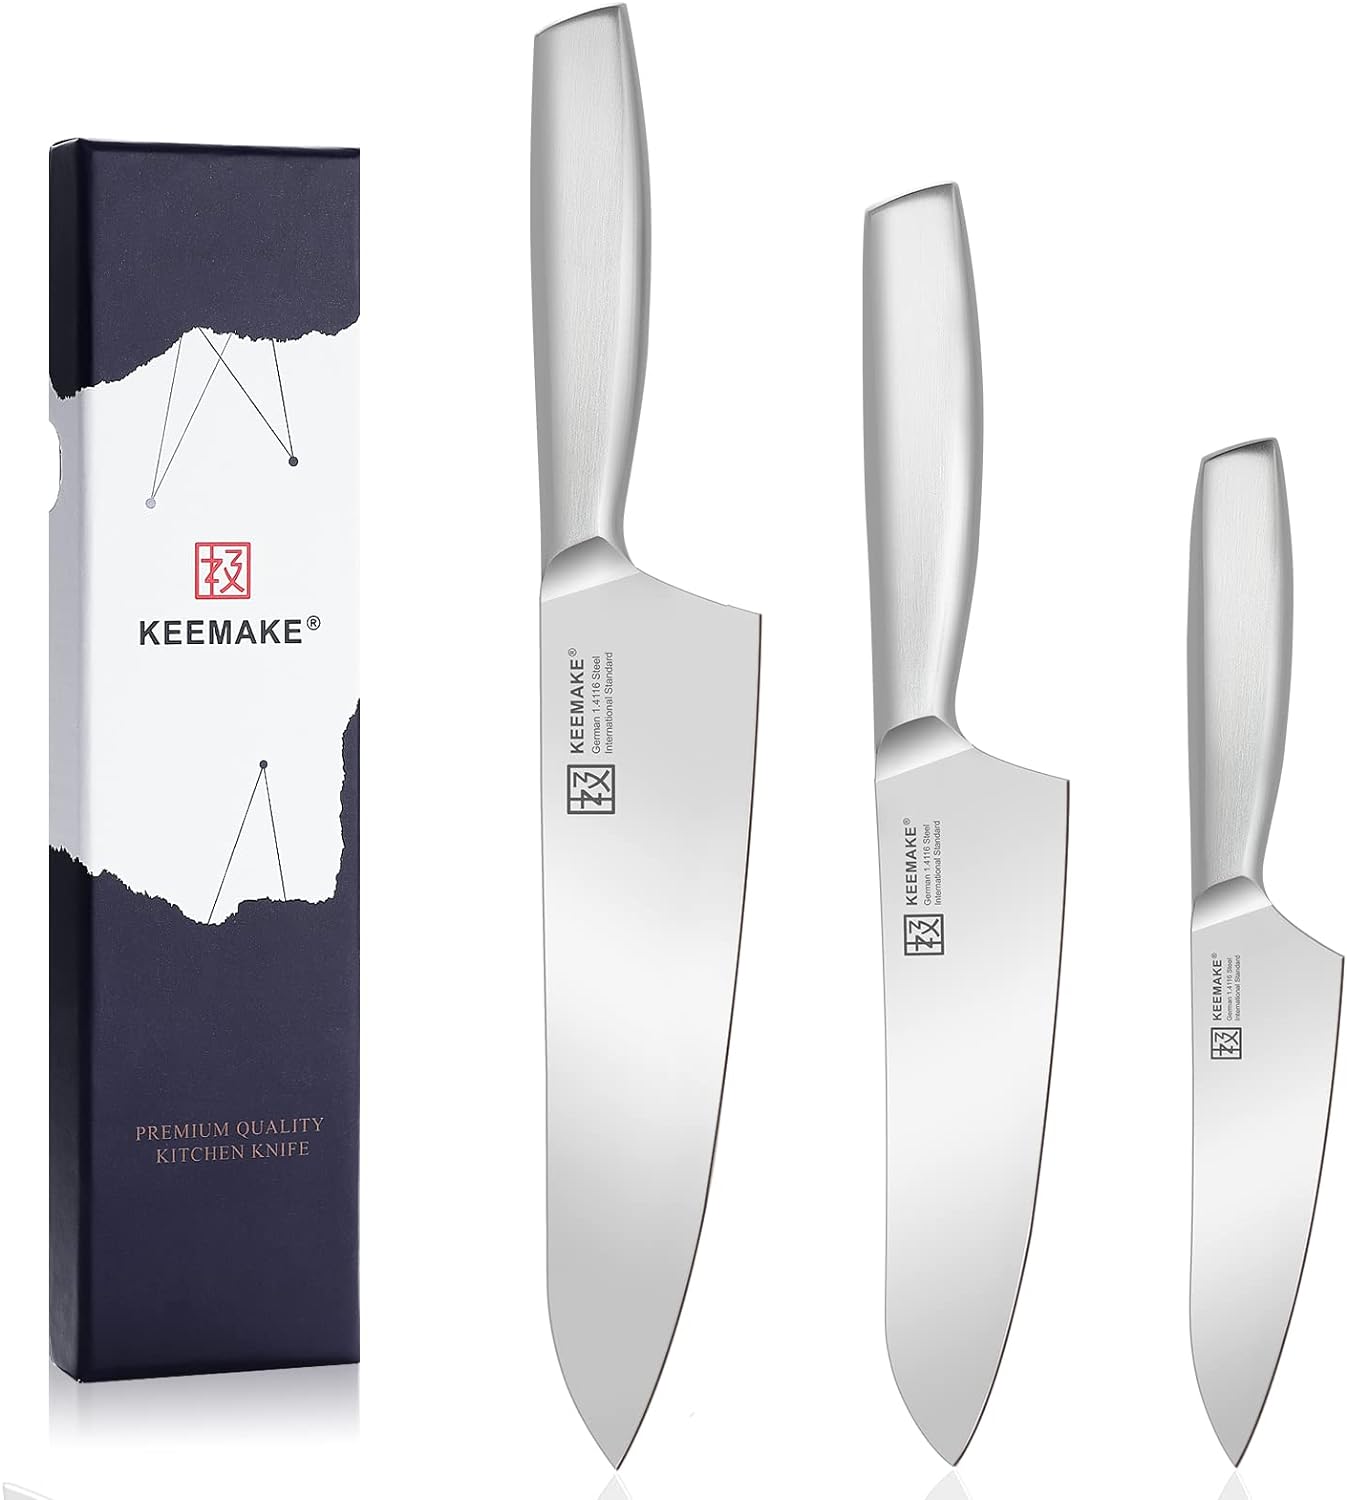 KEEMAKE 3pcs kitchen knife set high carbon stainless steel 1.4116 for meat & vegetable cutting